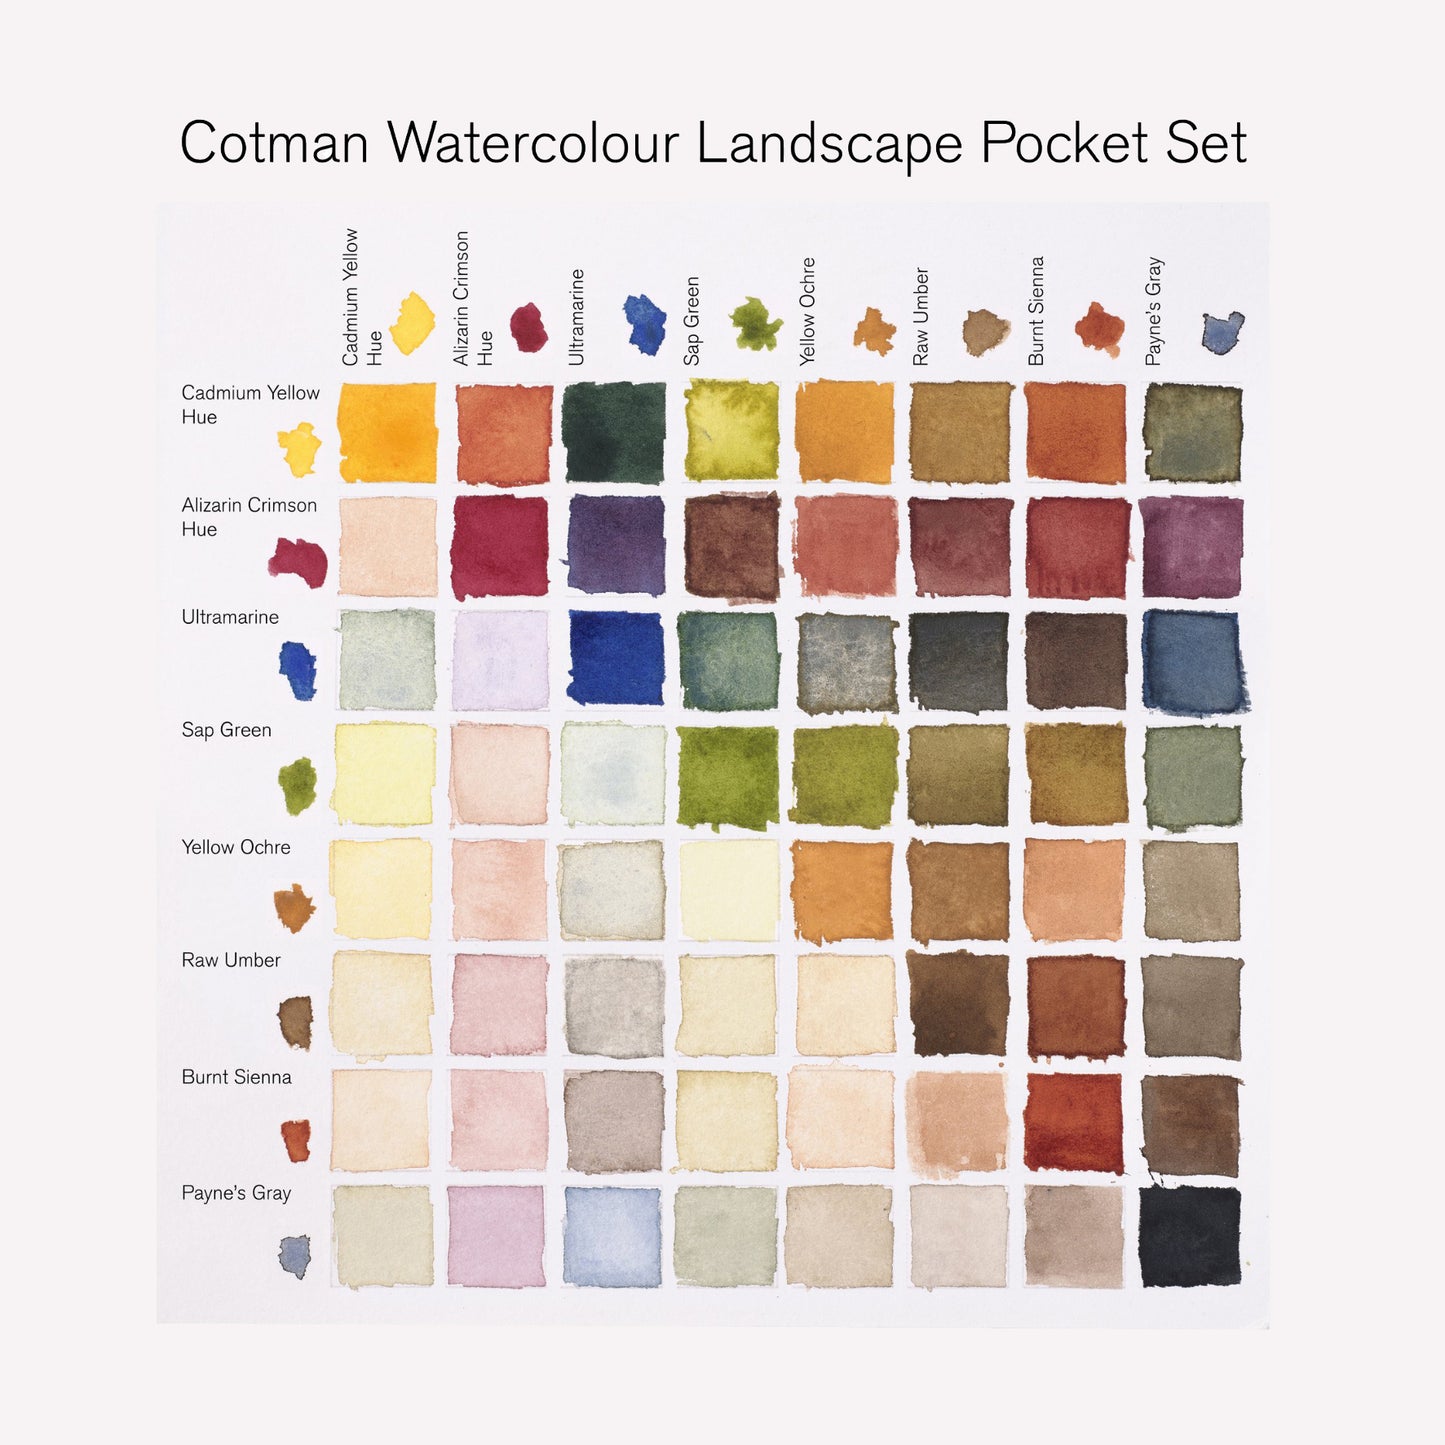 Cotman Watercolour Landscape pocket set colour chart demonstrates the colour spectrum that can be mixed using the 8 available half pans in this set. This palette has been carefully curated for painting landscape and scenery pieces. 